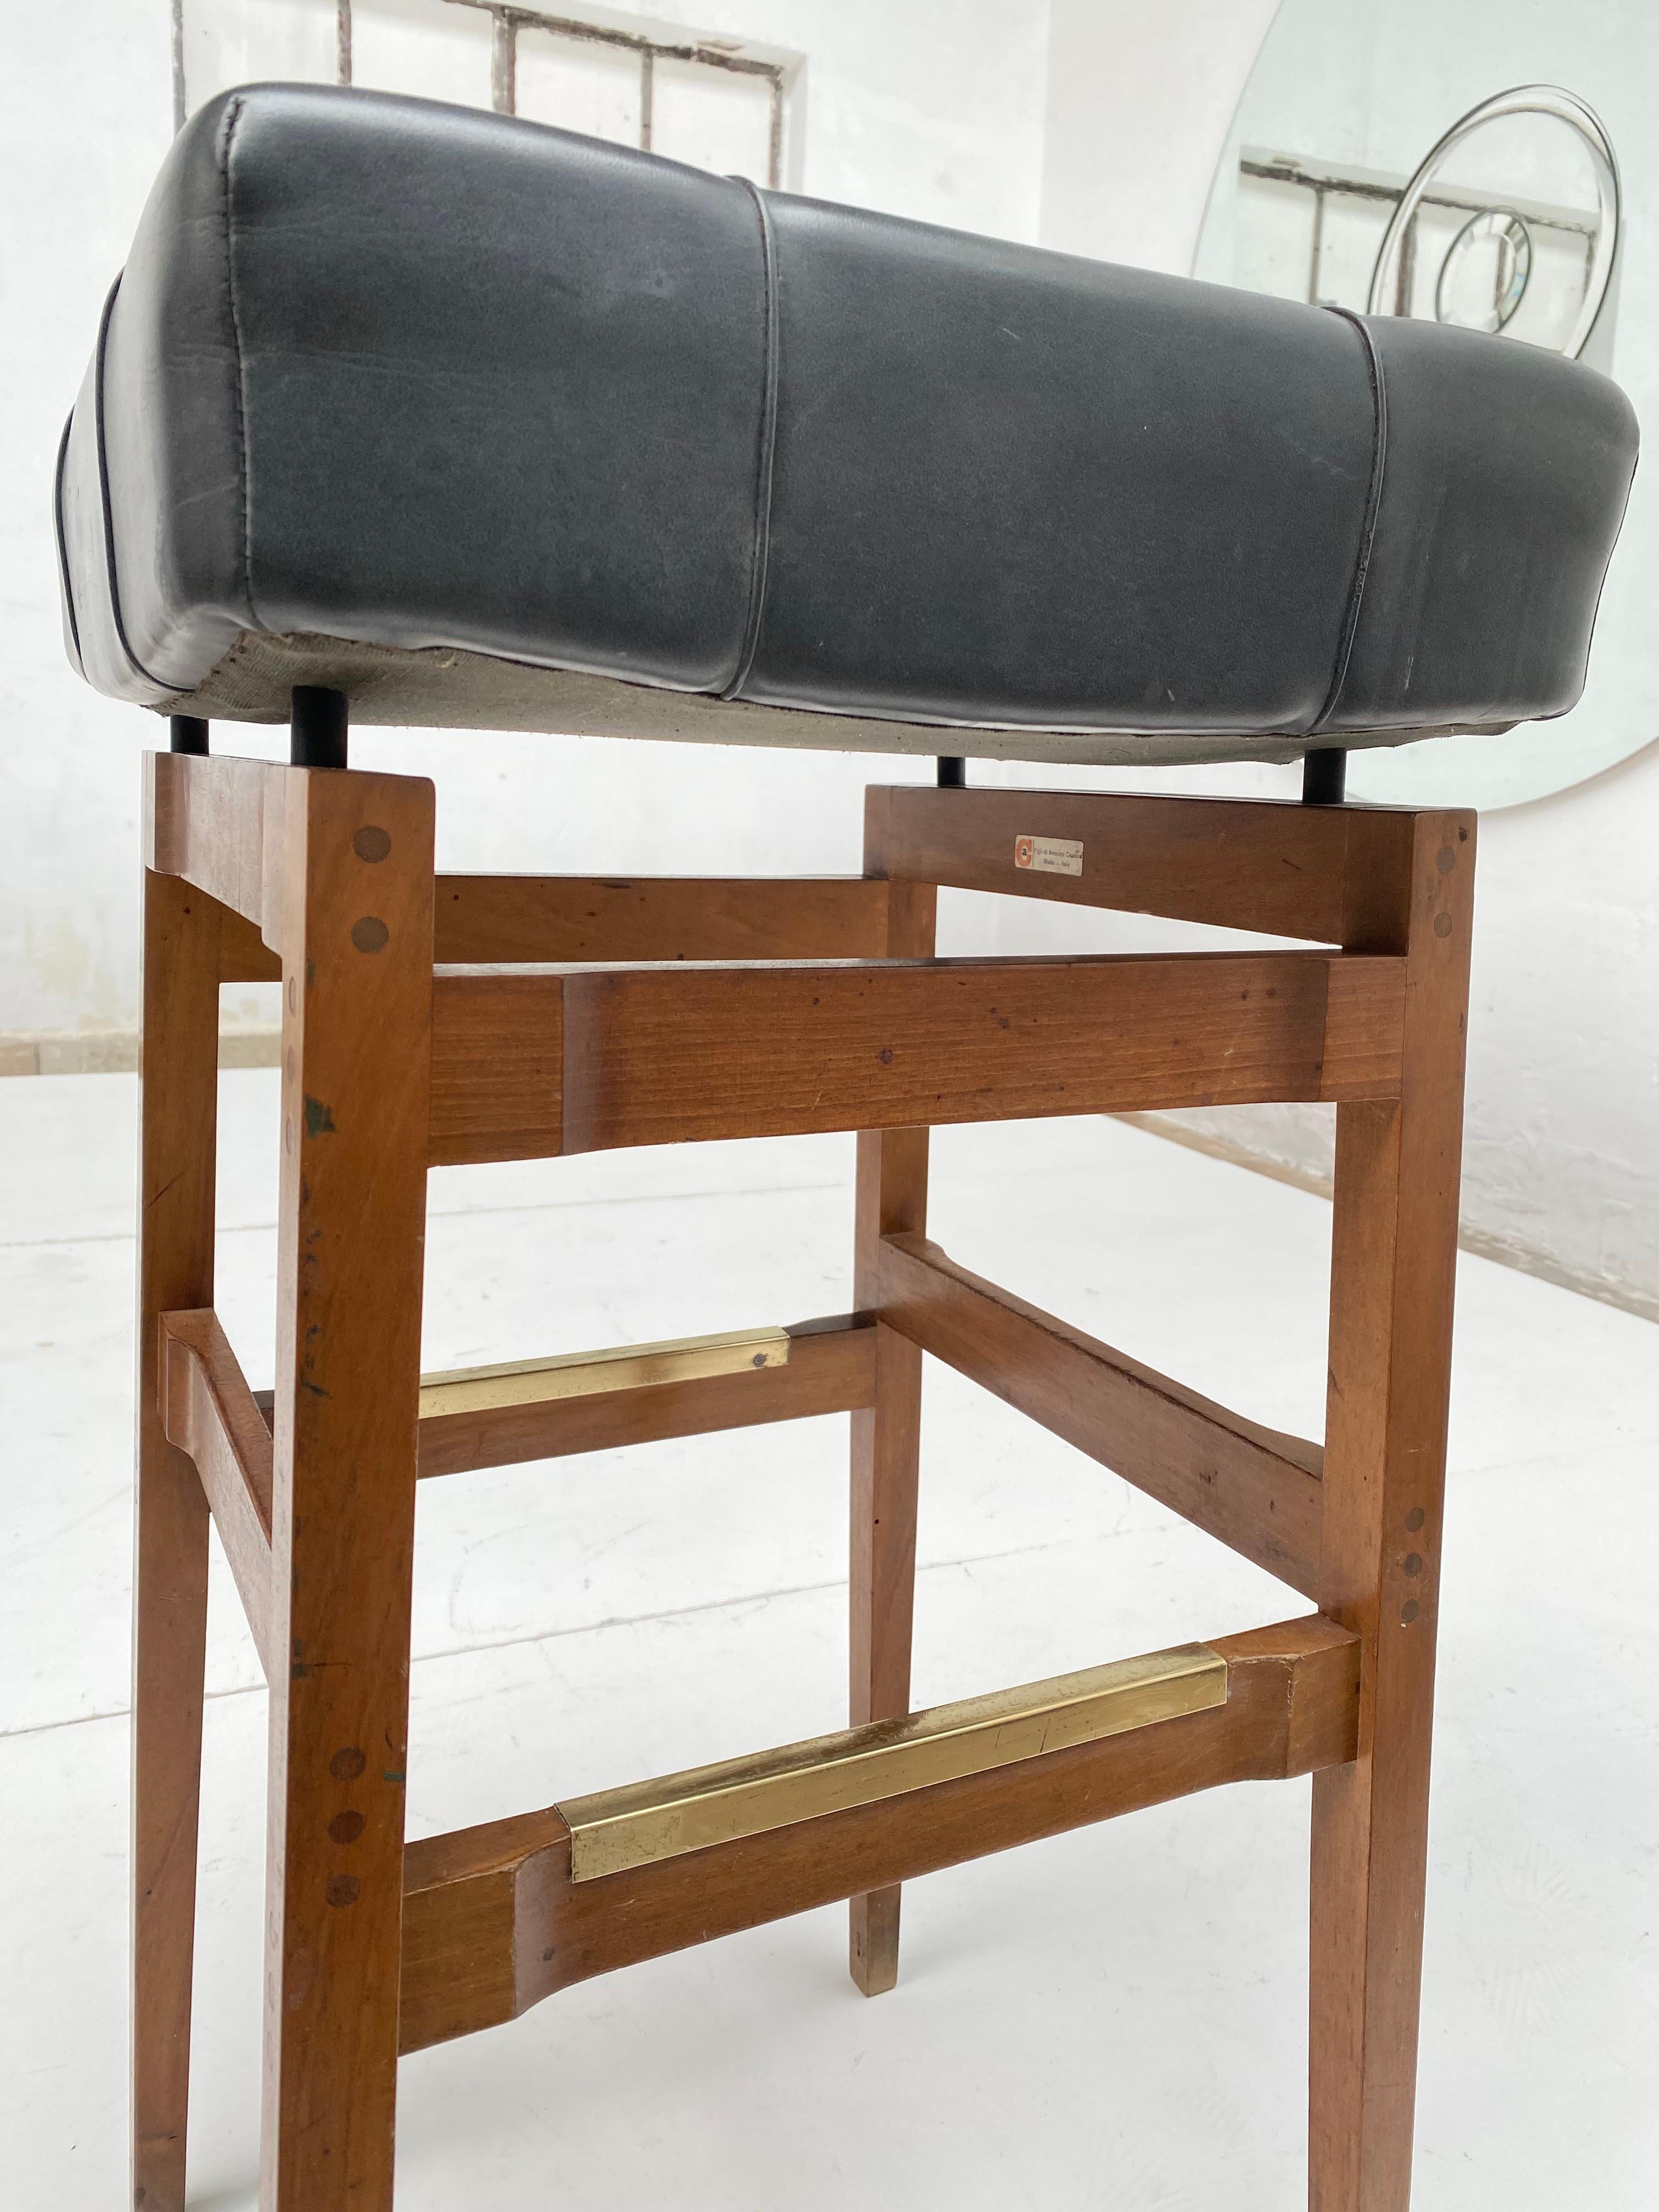 Hand-Crafted Stool Designed by G. Frattini Cassina from Hotel Parco Dei Principi, Published For Sale